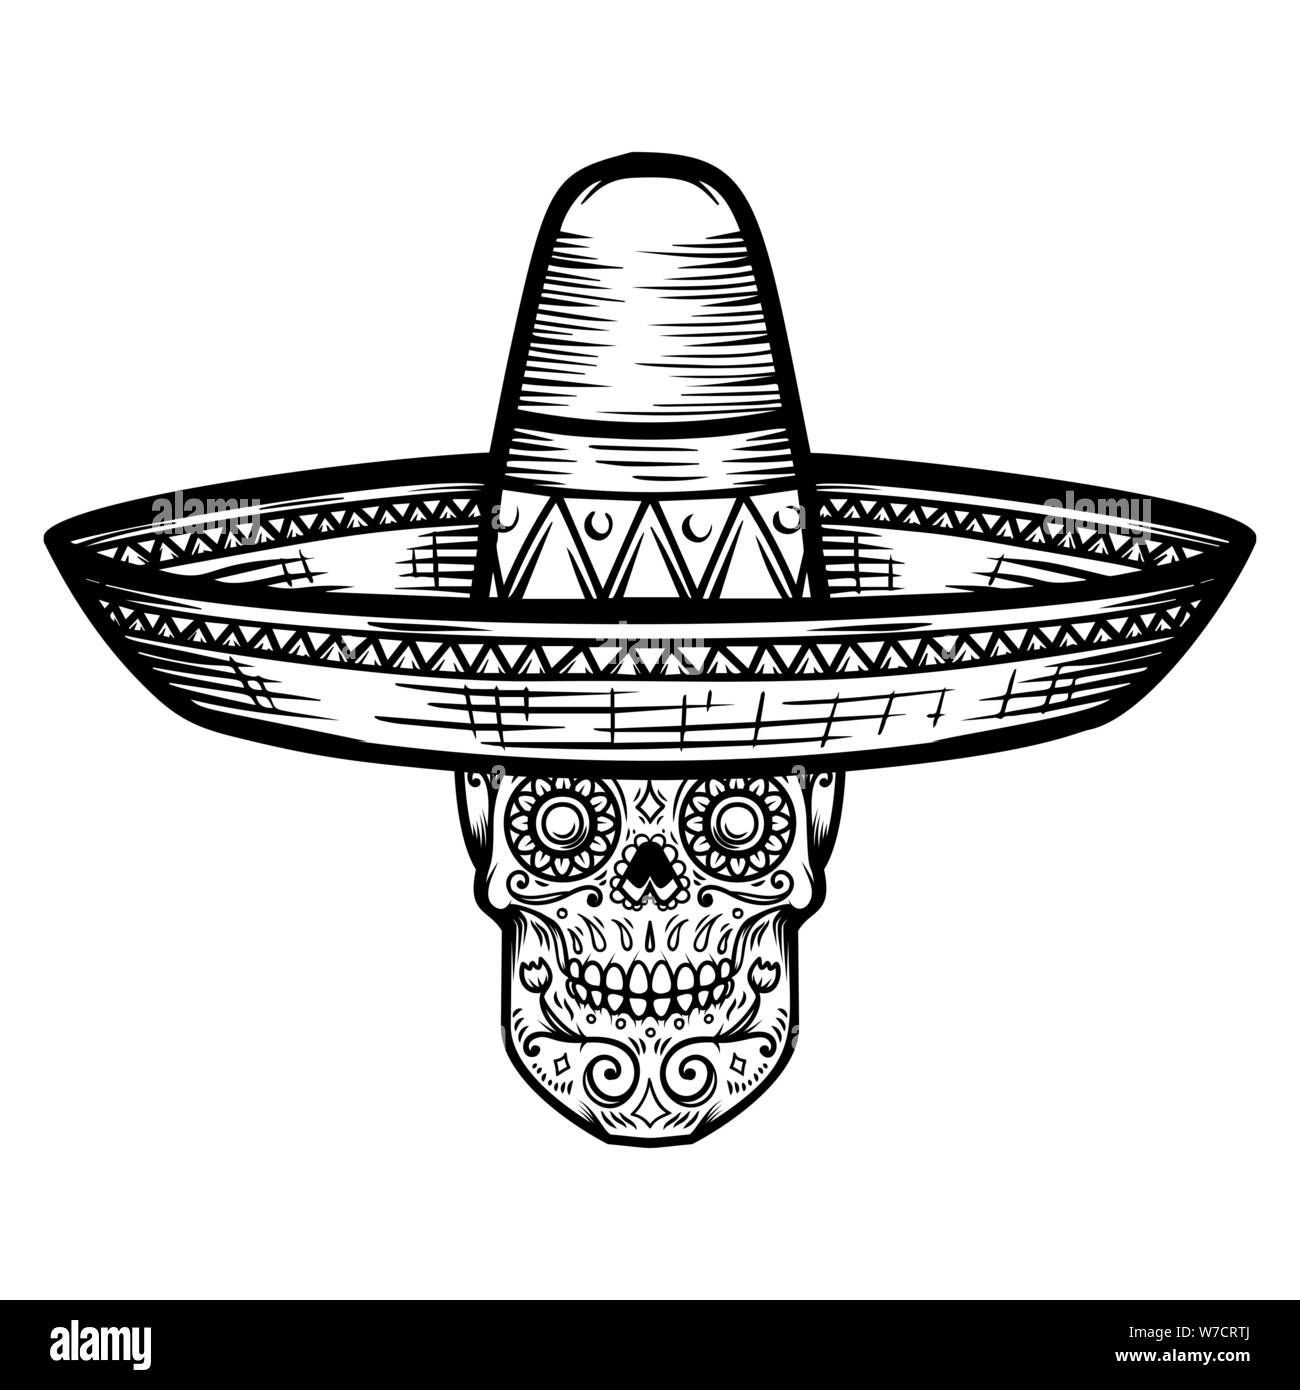 Mexican sugar skull in sombrero. Day of the dead theme. Design element for poster, t shirt, emblem, sign. Stock Vector